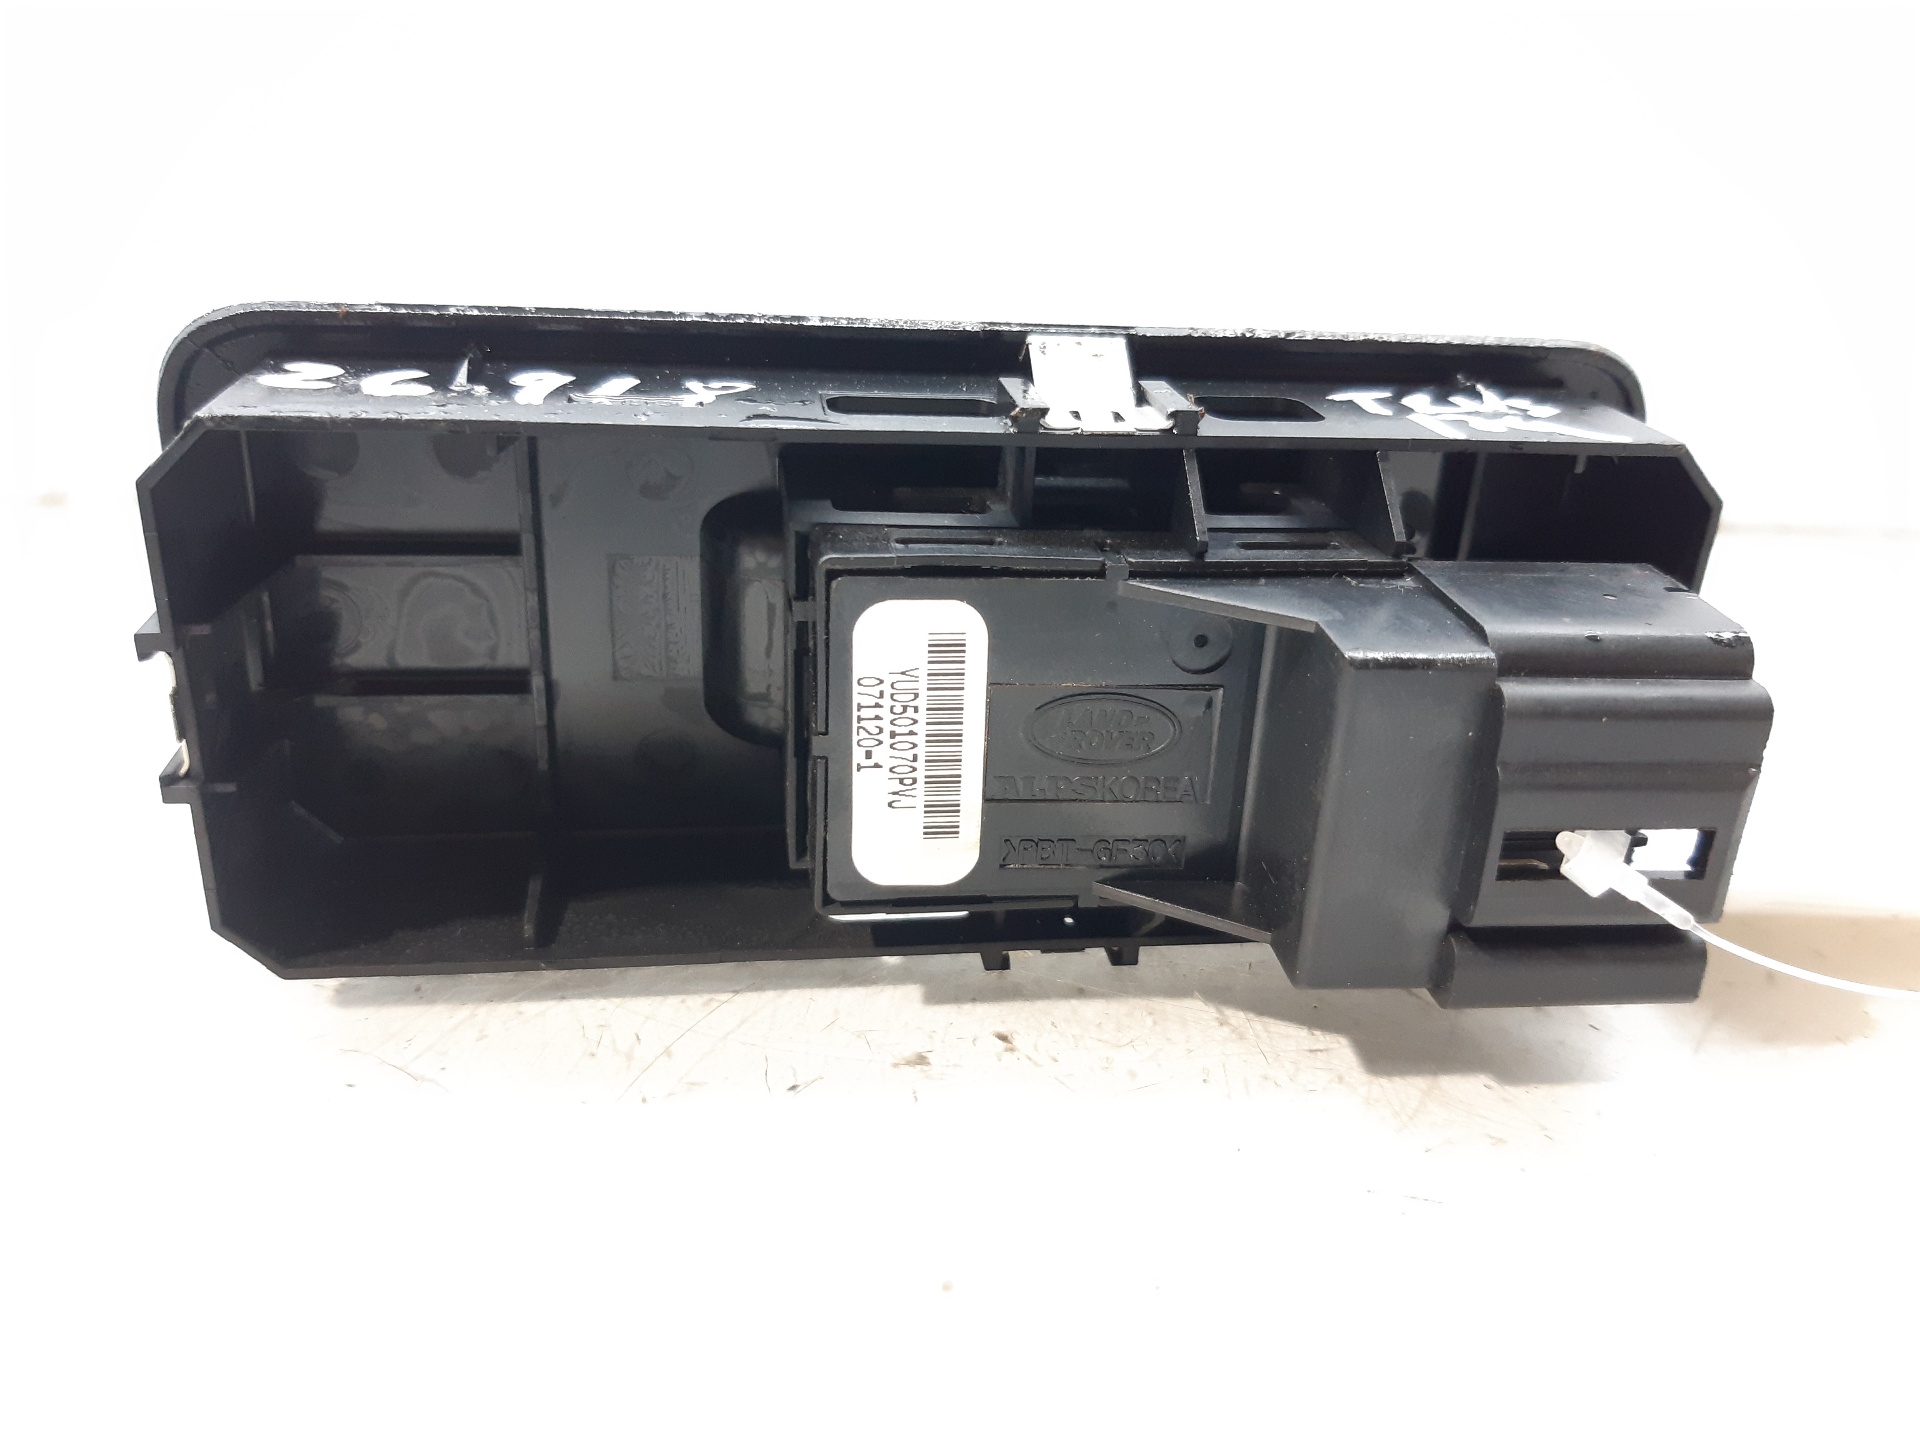 LAND ROVER Discovery 3 generation (2004-2009) Rear Right Door Window Control Switch YUD501070PVJ 24131901